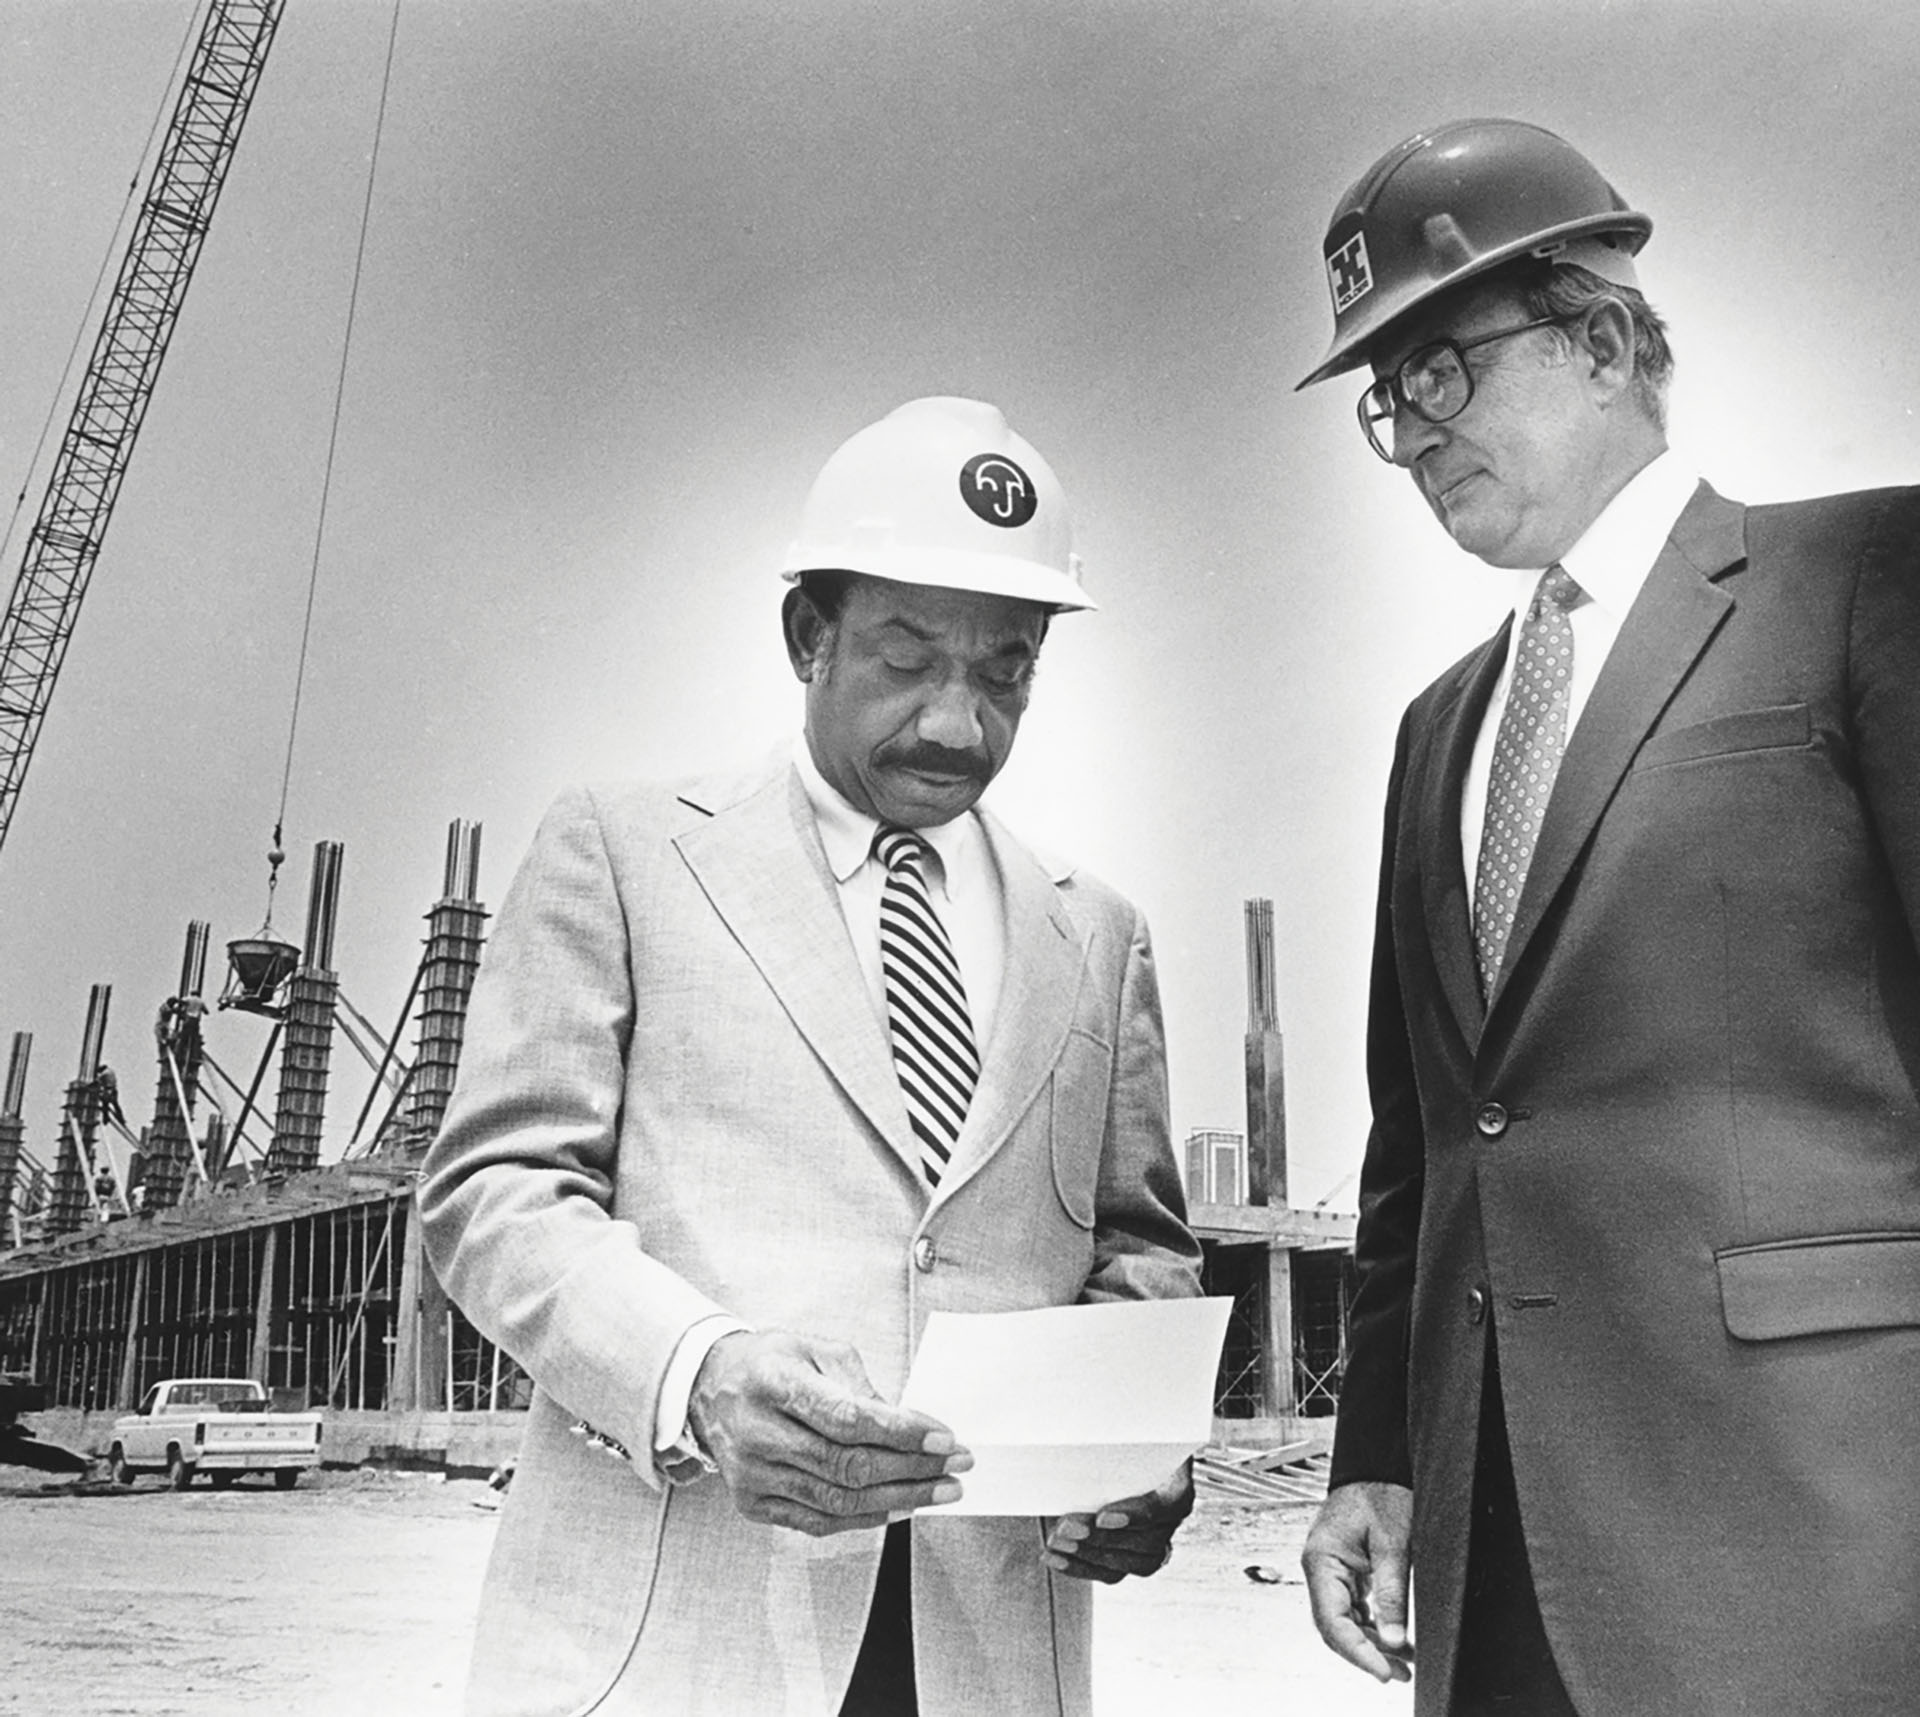 Herman J. Russell and a business associate look over paperwork while wearing hard hats and suits on a construction site